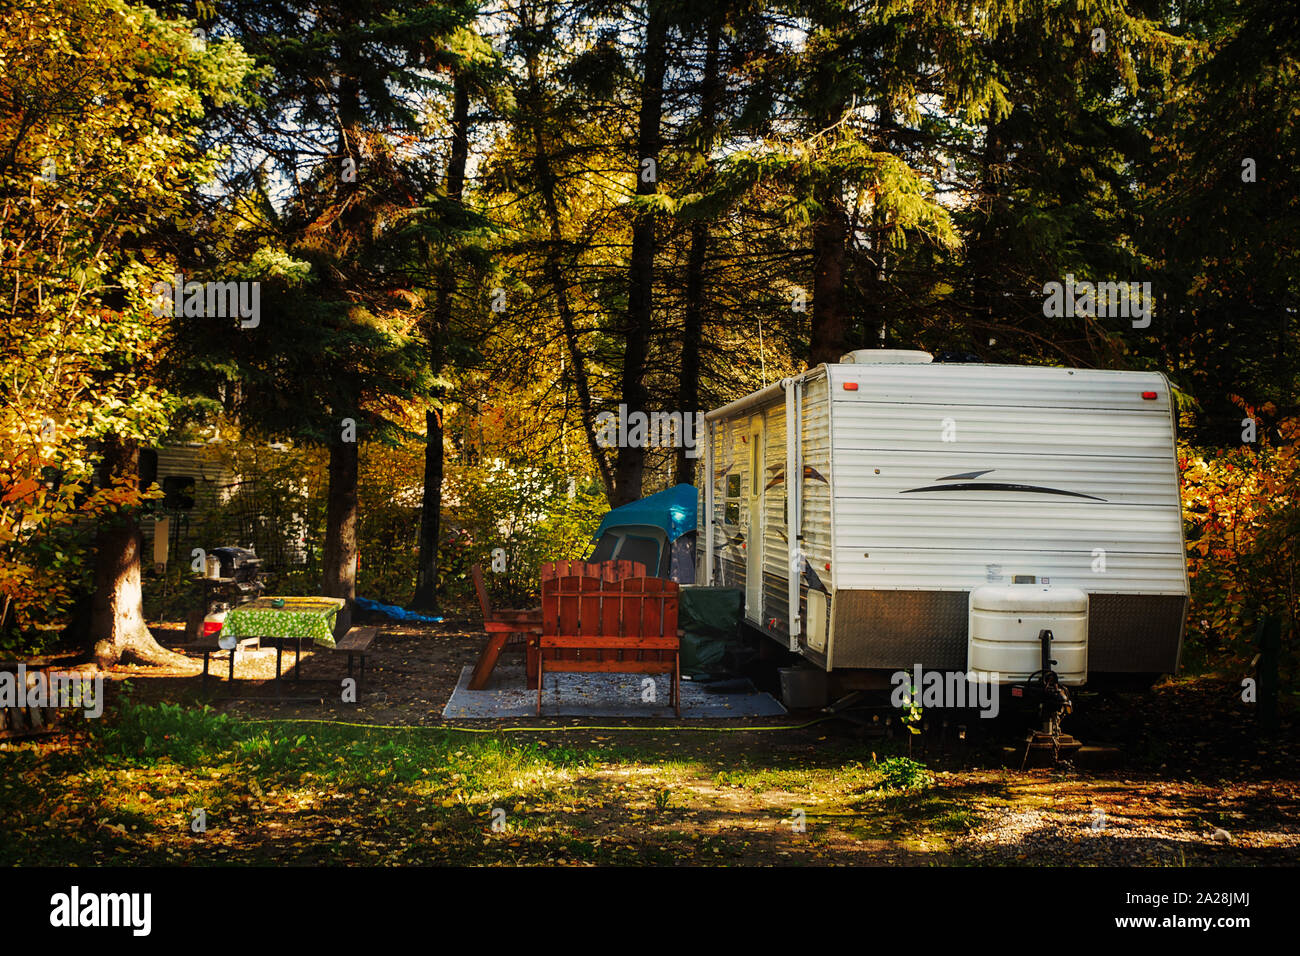 A deserted camper trailer and tent with wooden chairs on outdoor carpet and cloth covered table surrounded by tall pine trees parked in a deserted cam Stock Photo